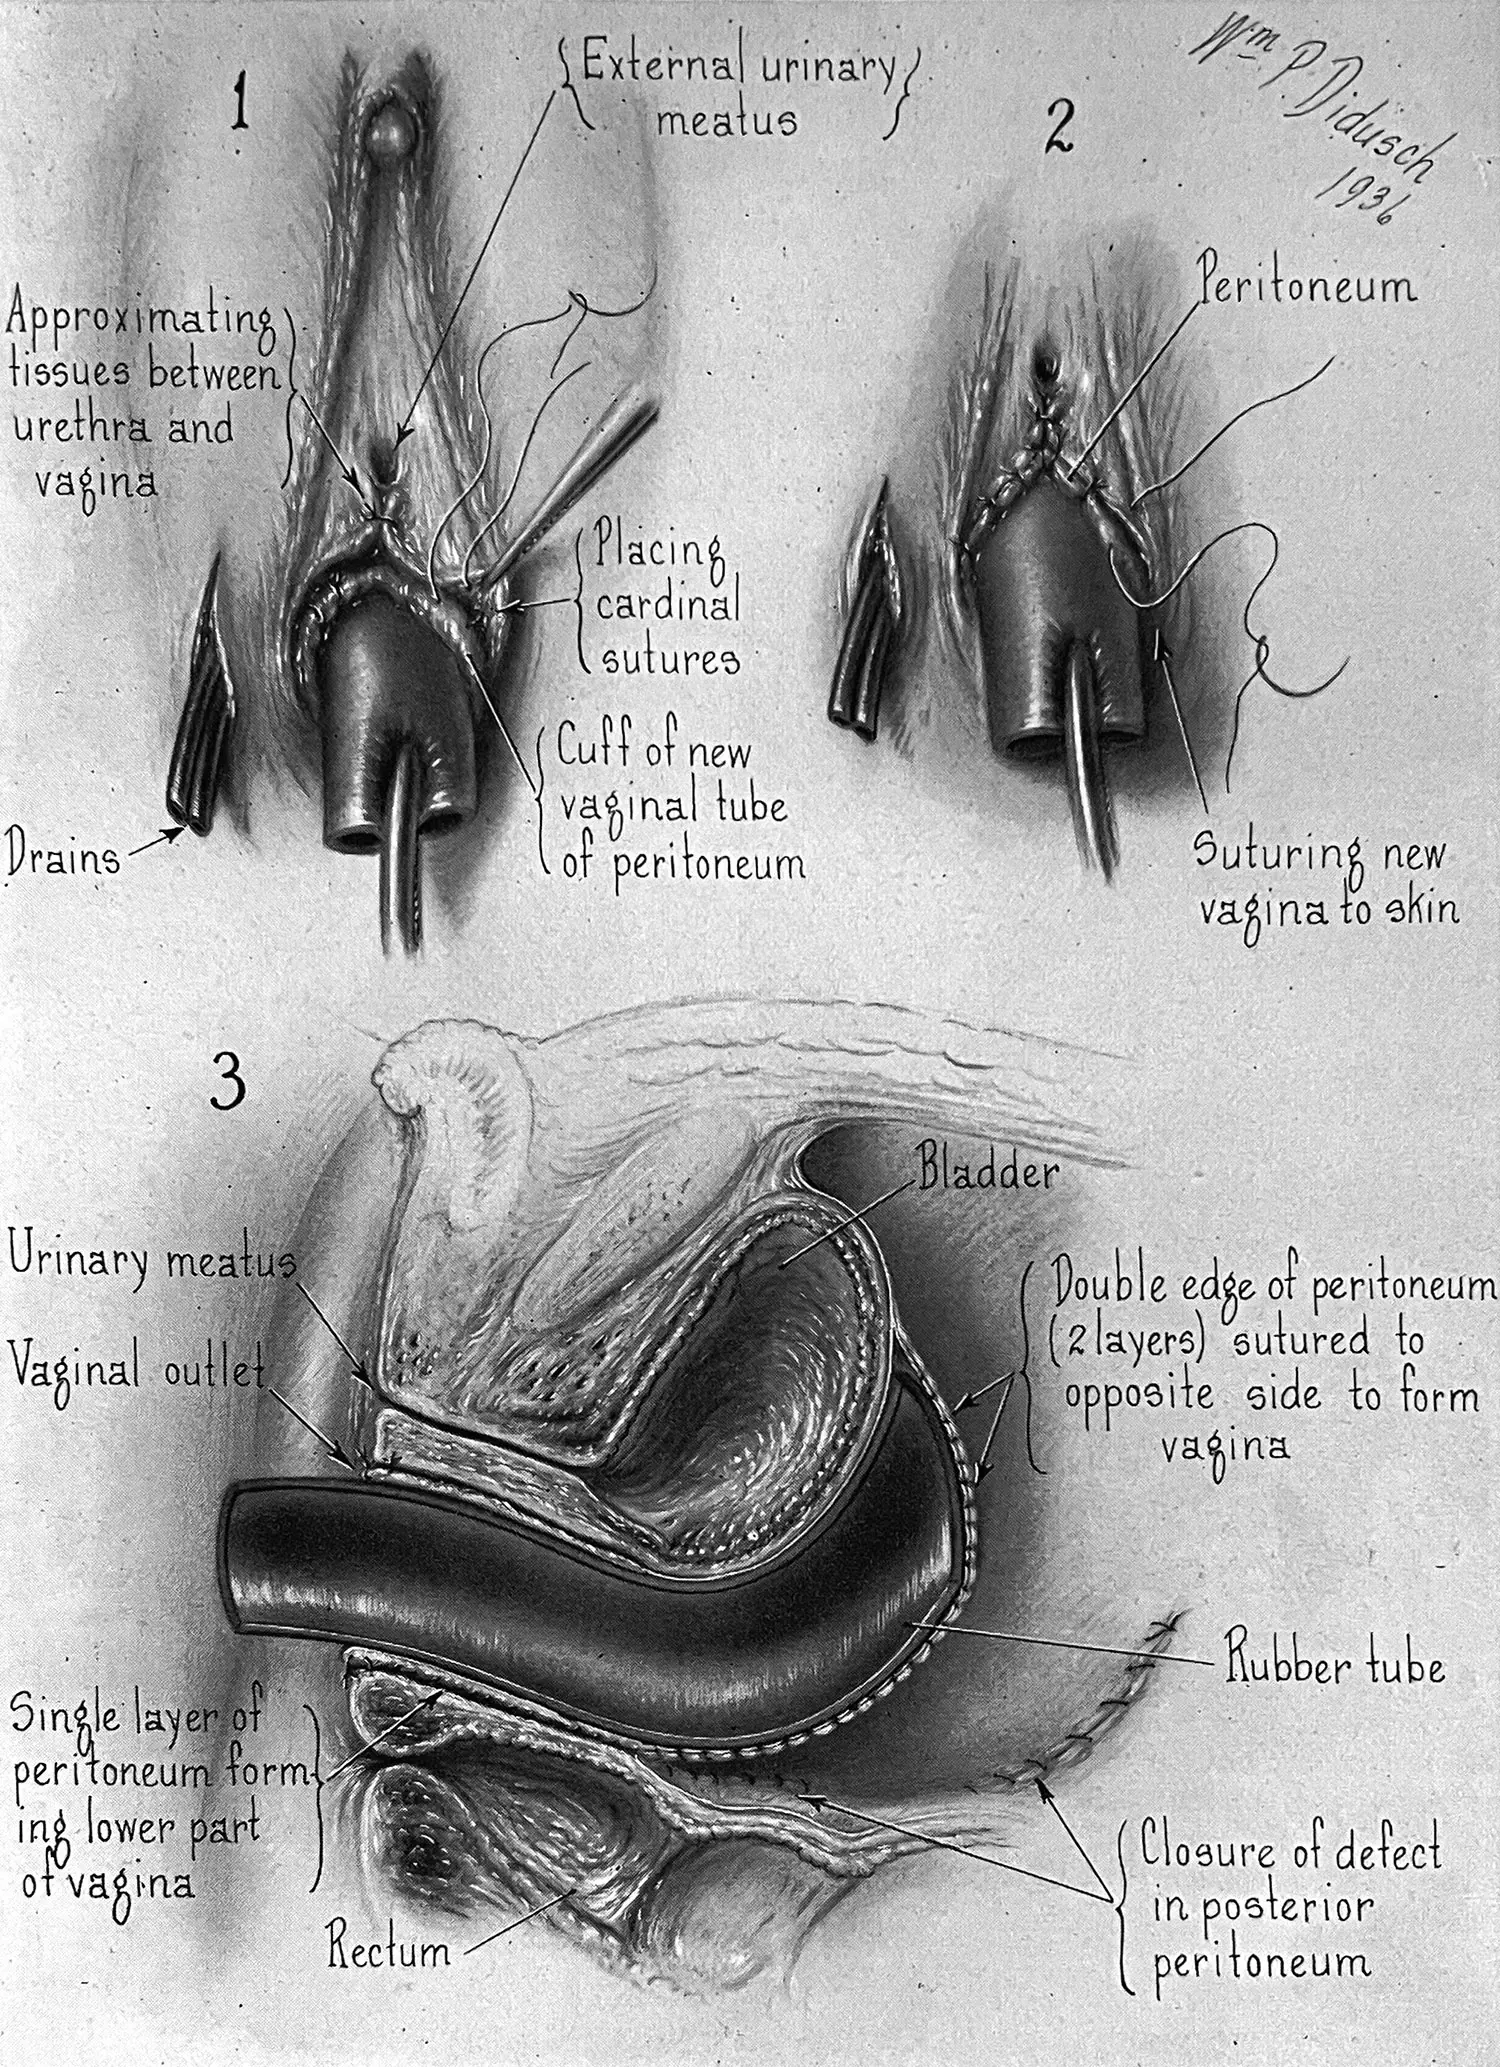 Hand-drawn medical illustrations showing three steps in the surgical construction of an artificial vagina. Dated 1936.